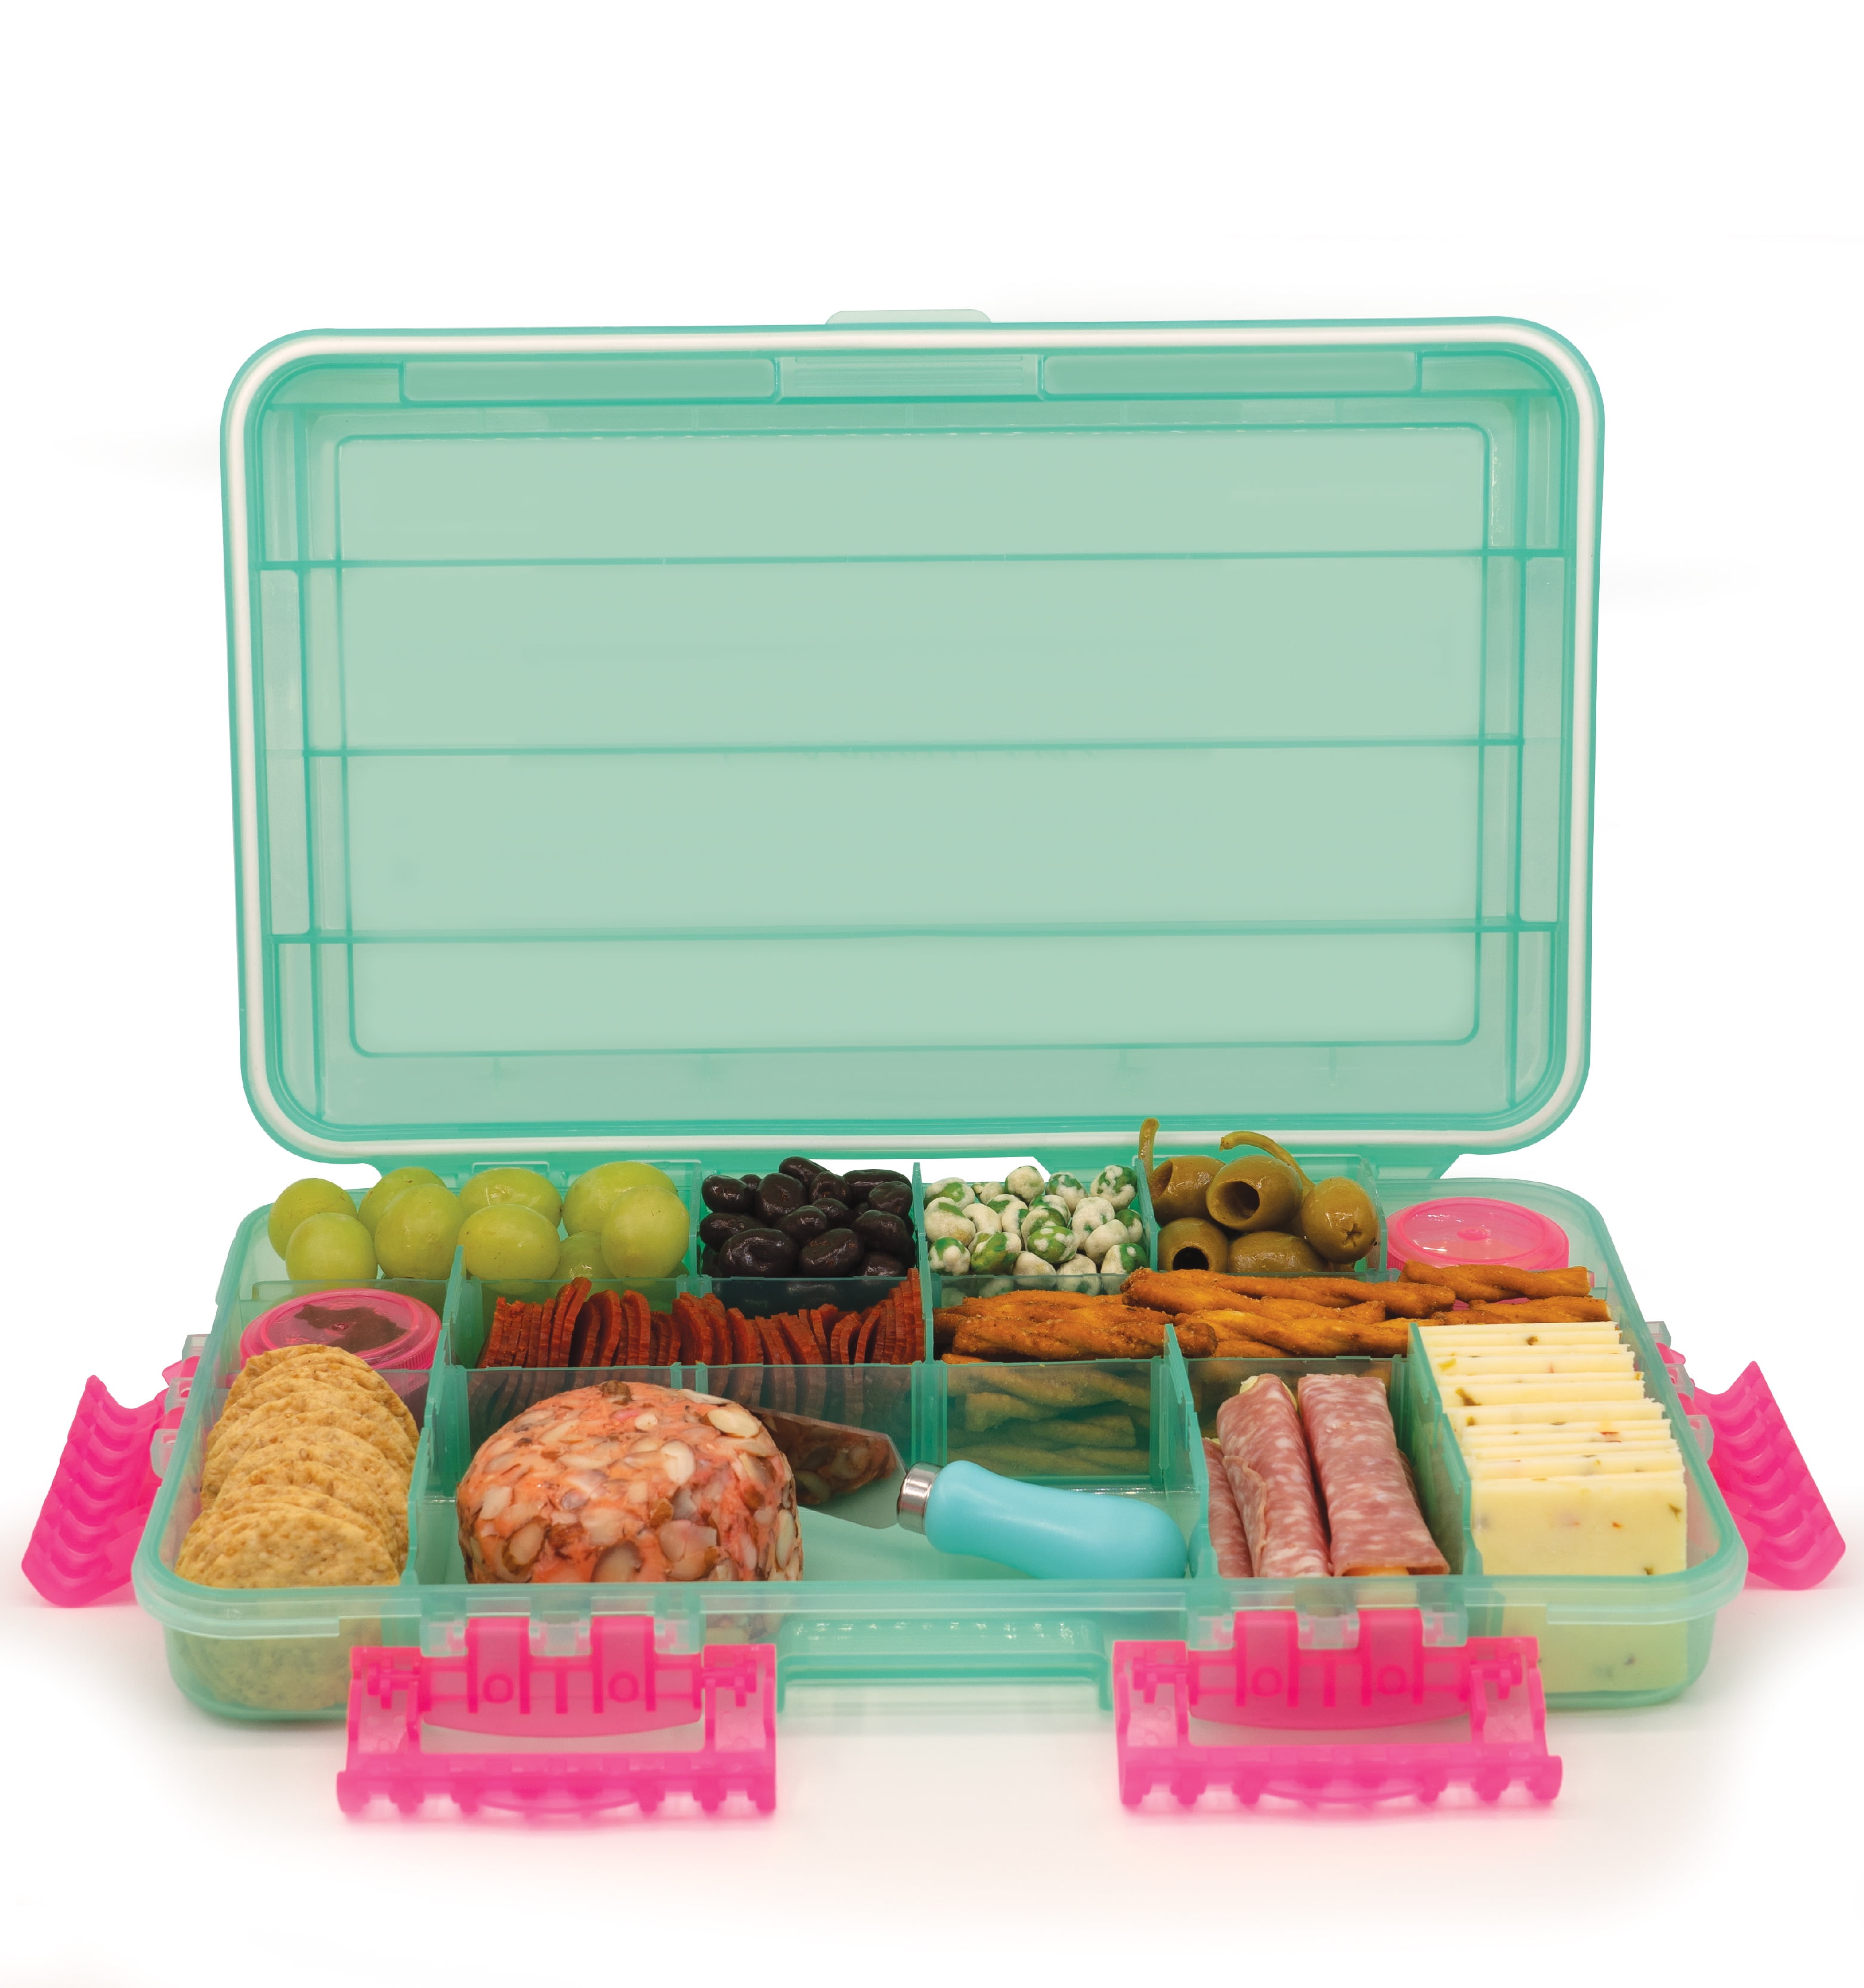 Snackle Box - On The Go Charcuterie/Snack Box Tips - Small